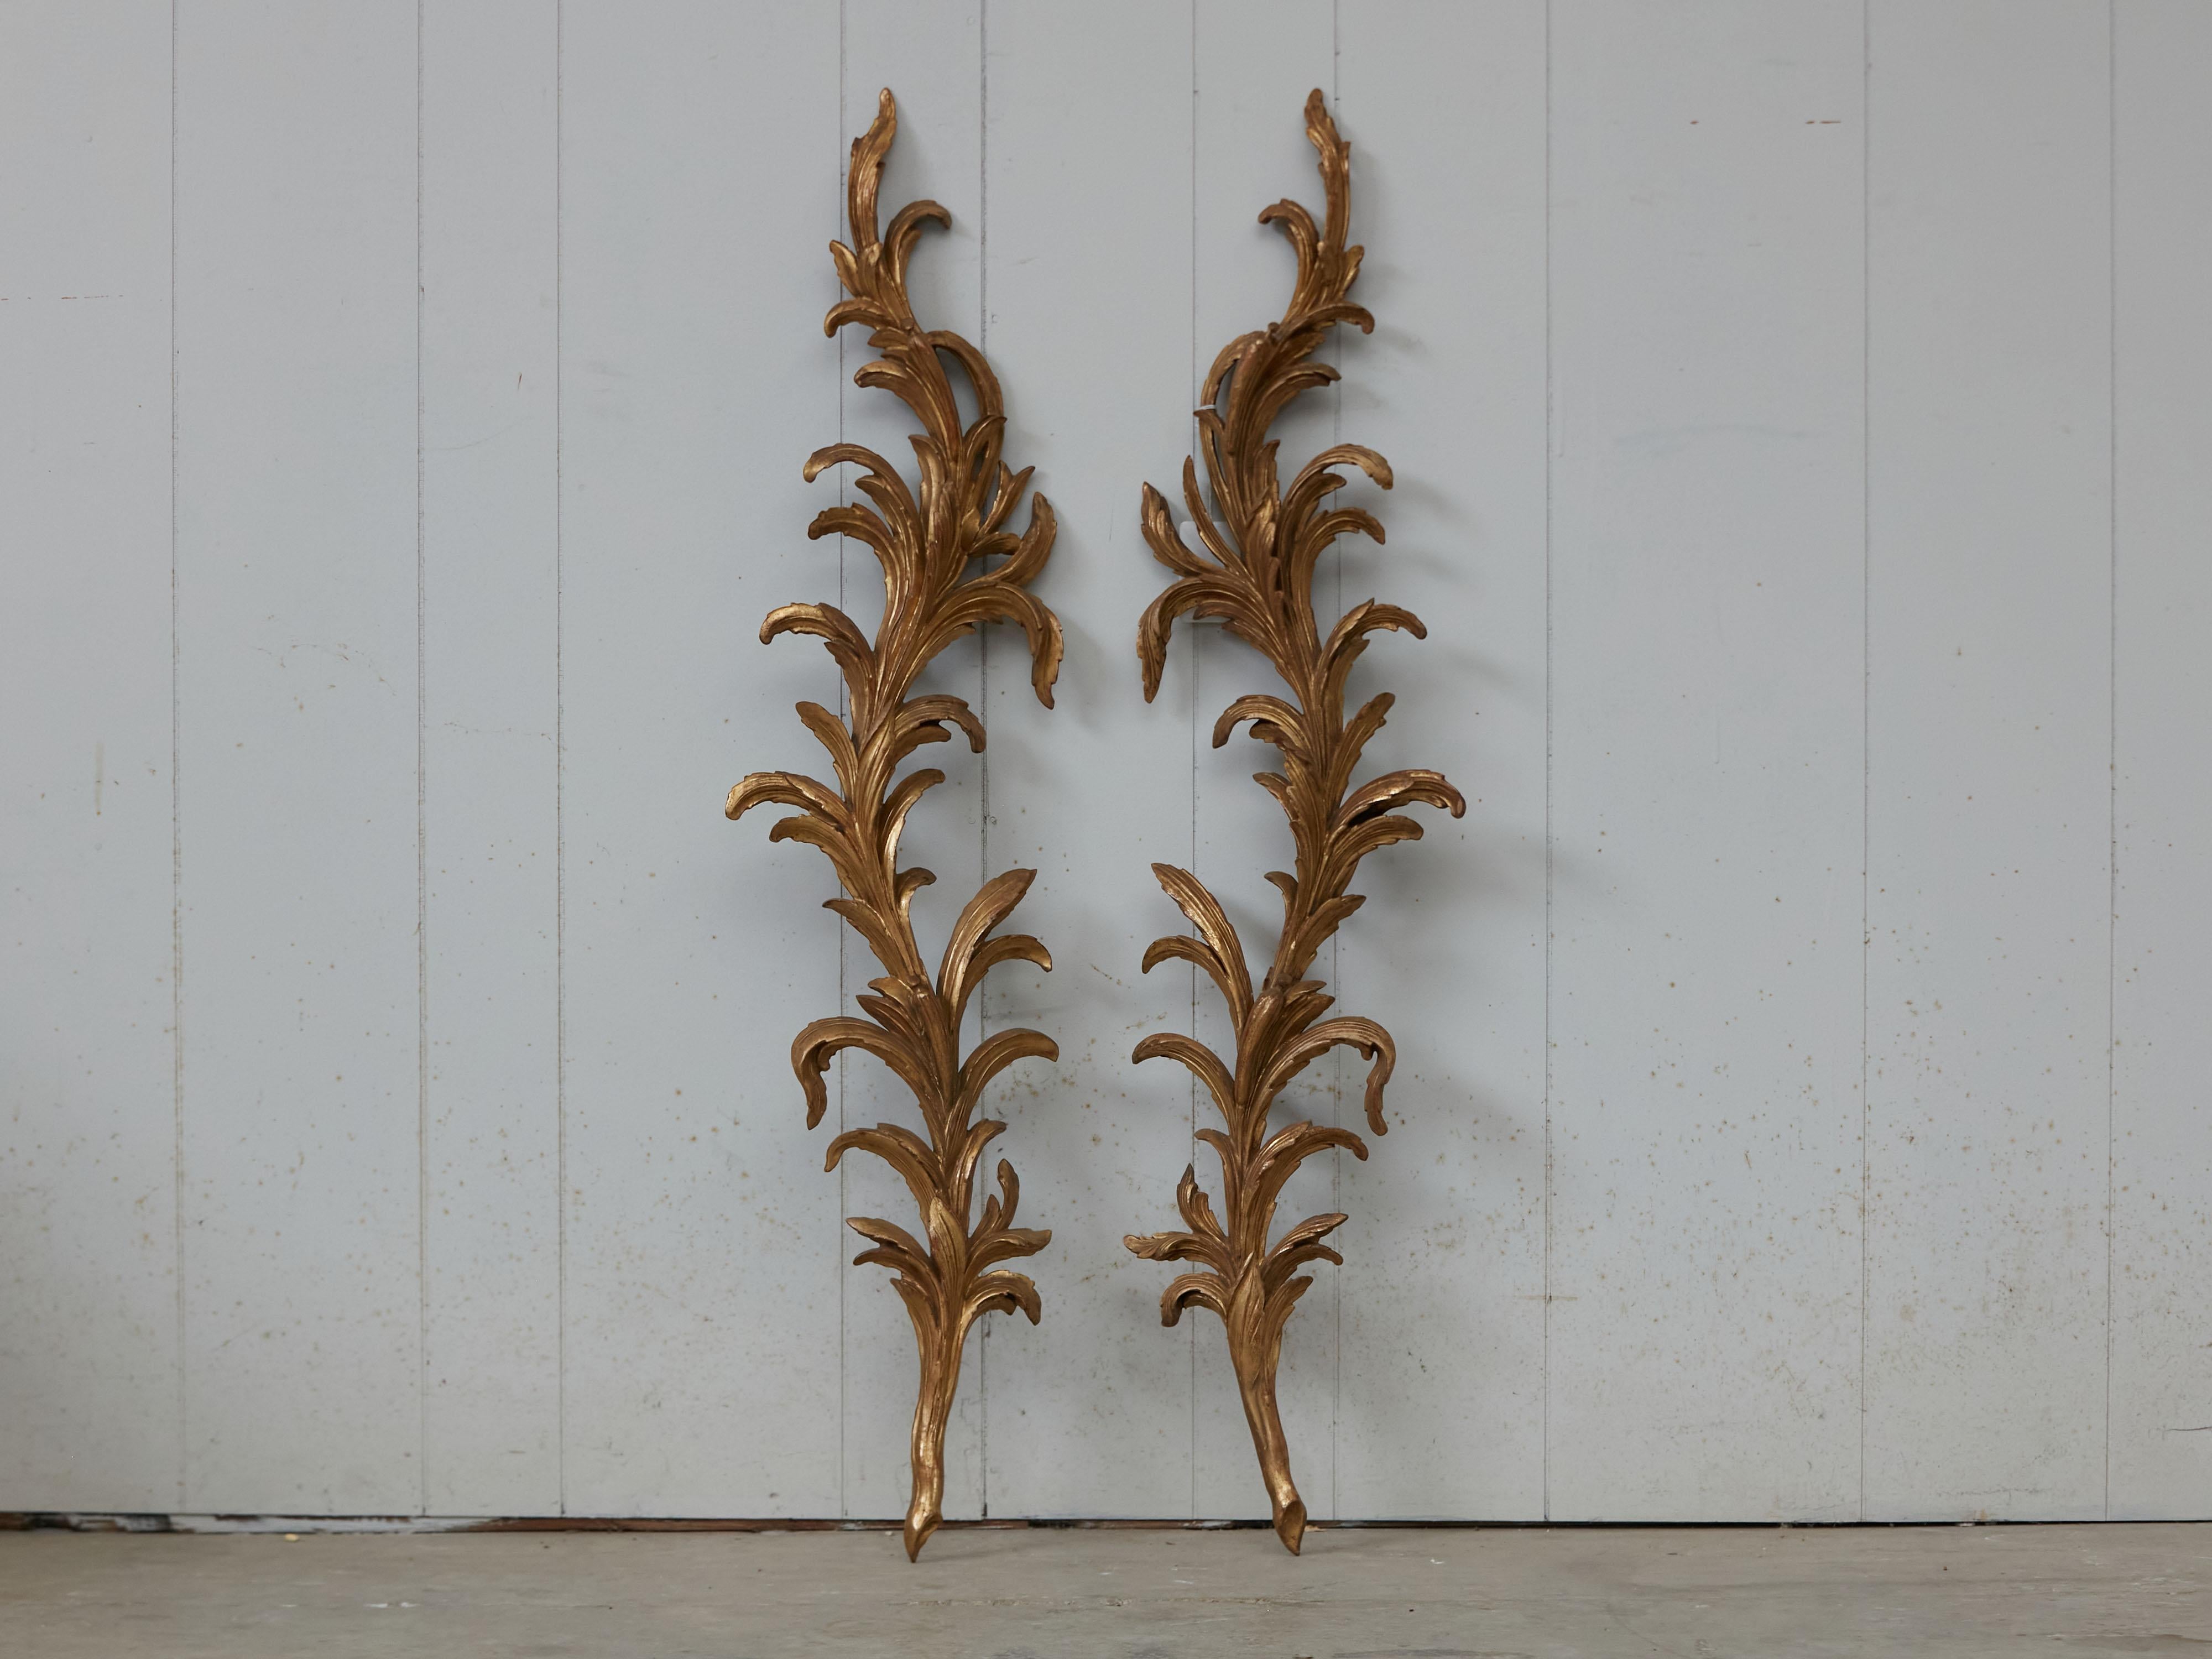 A pair of Italian carved giltwood wall decorations from the early 19th century, with scrolling foliage. We currently have two pairs available, priced and sold $5,400 per pair. Created in Italy during the first quarter of the 19th century, each of